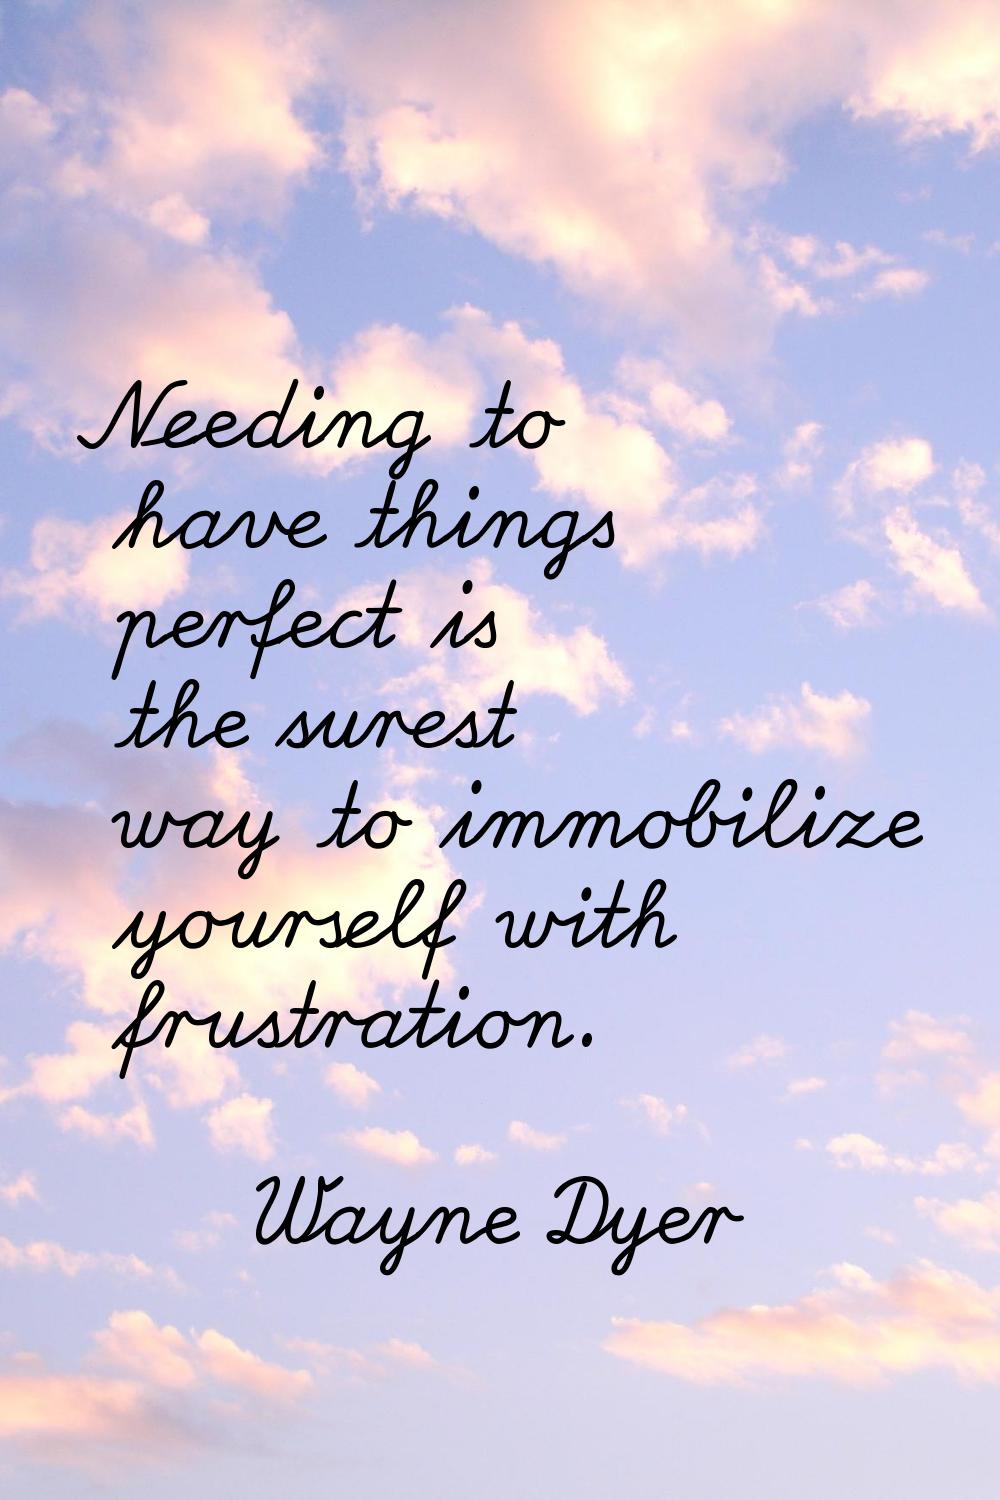 Needing to have things perfect is the surest way to immobilize yourself with frustration.